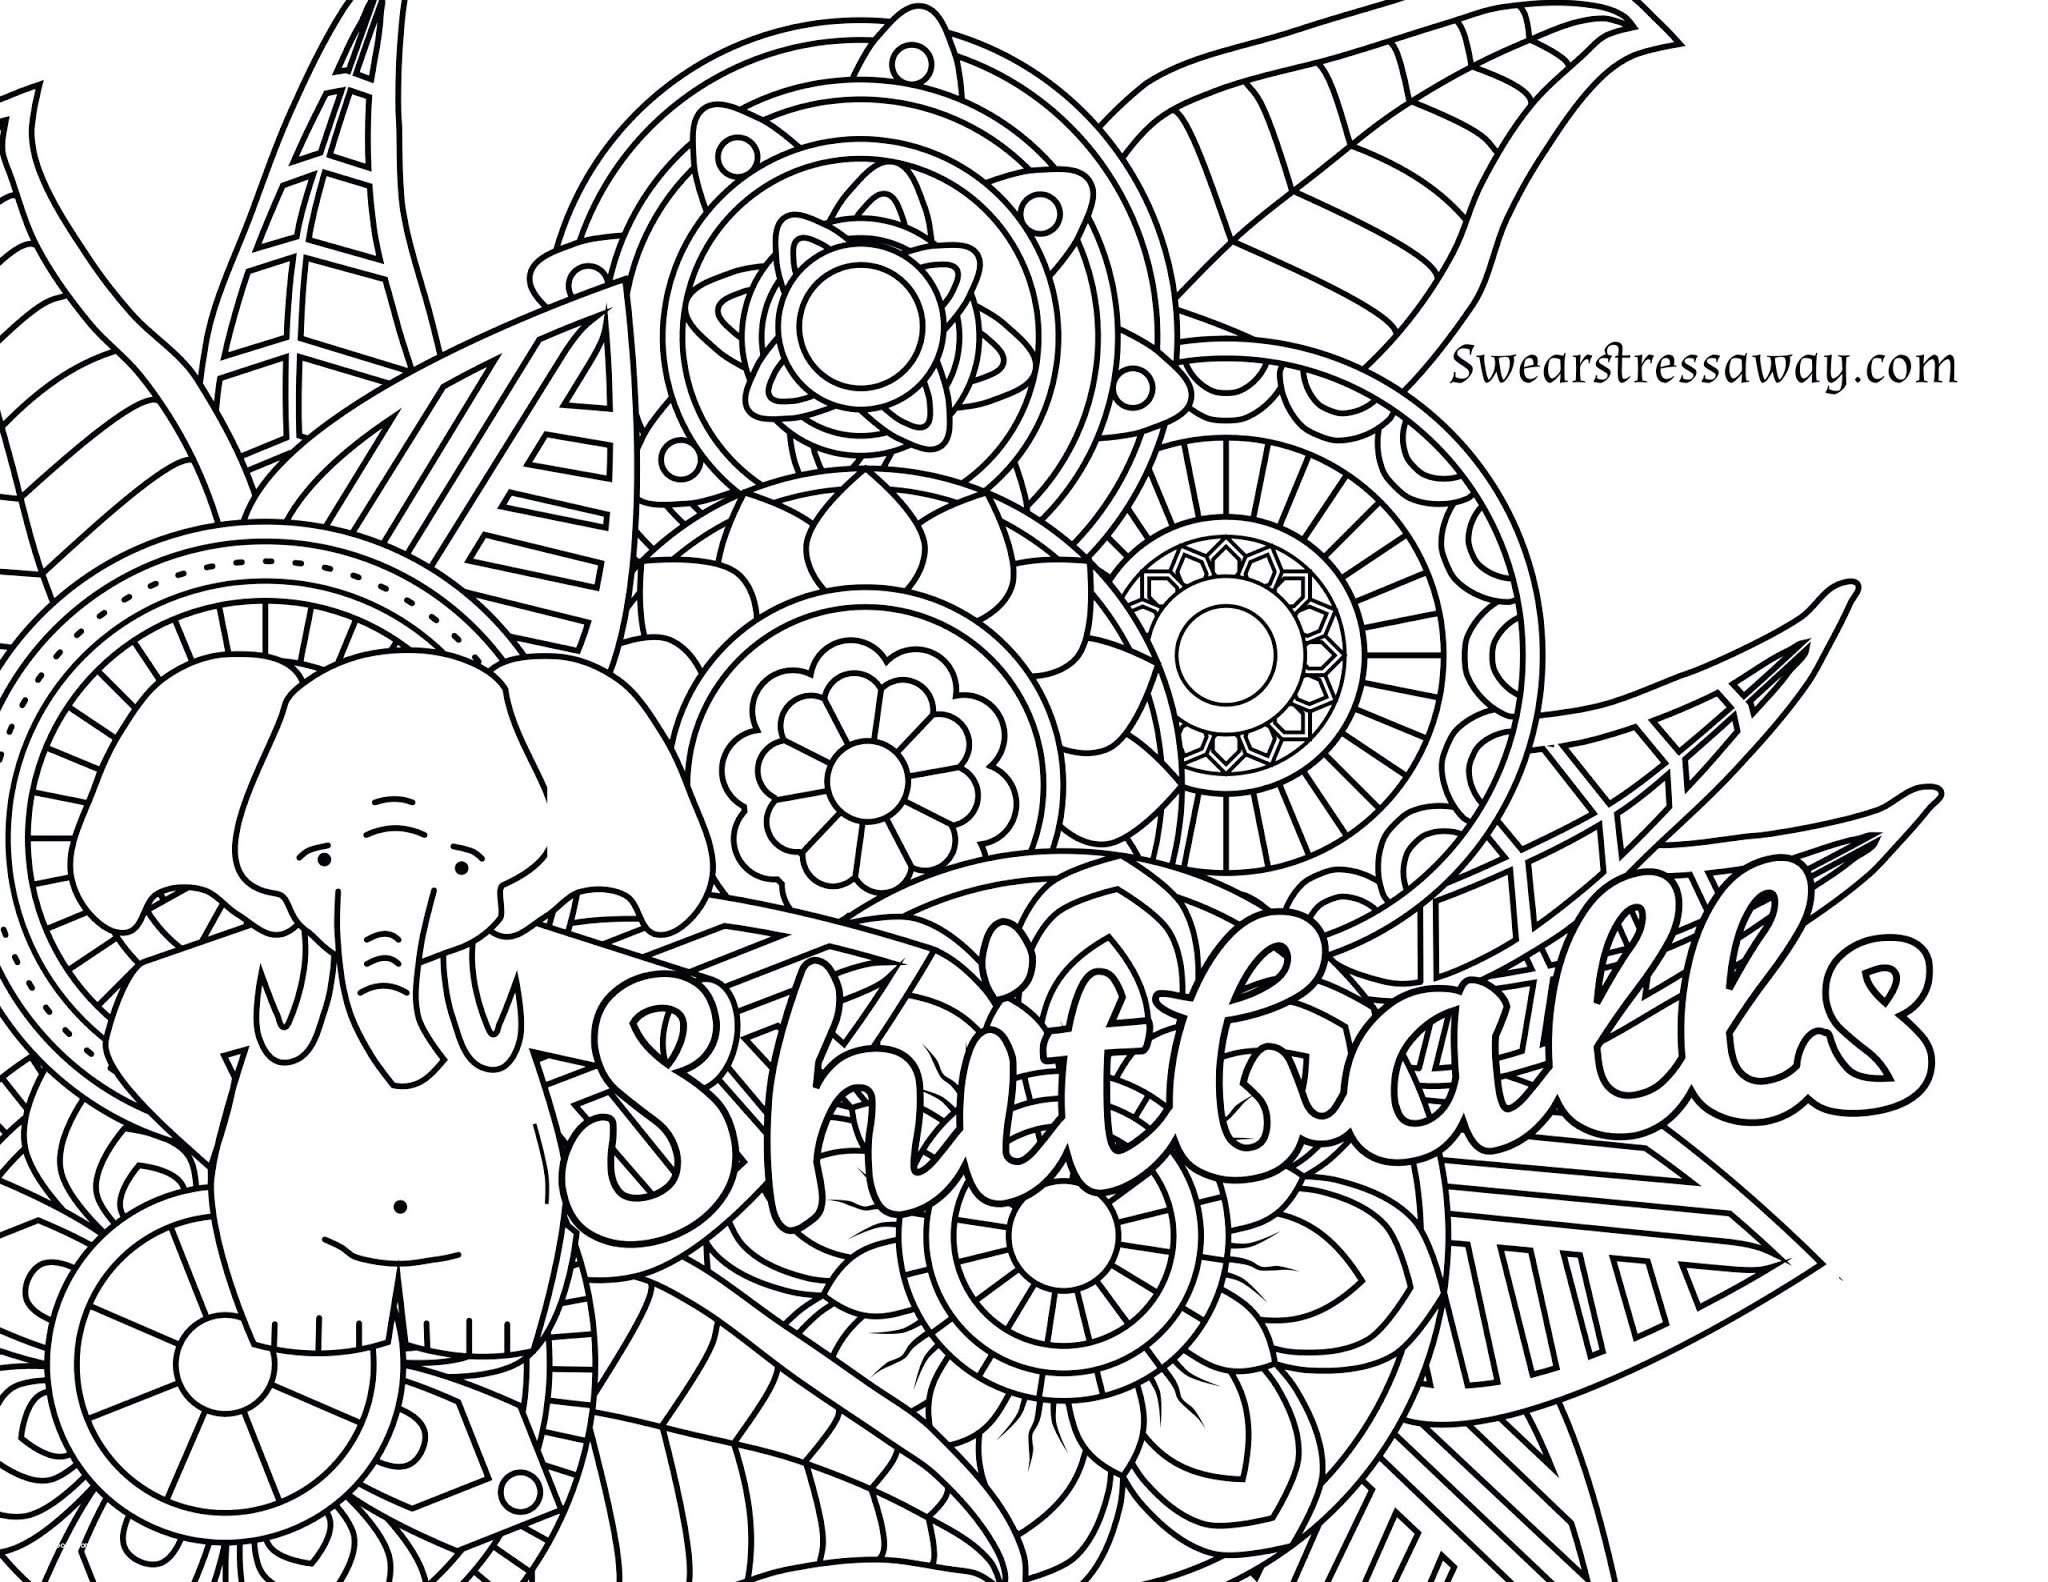 free-coloring-pages-download-coloring-pages